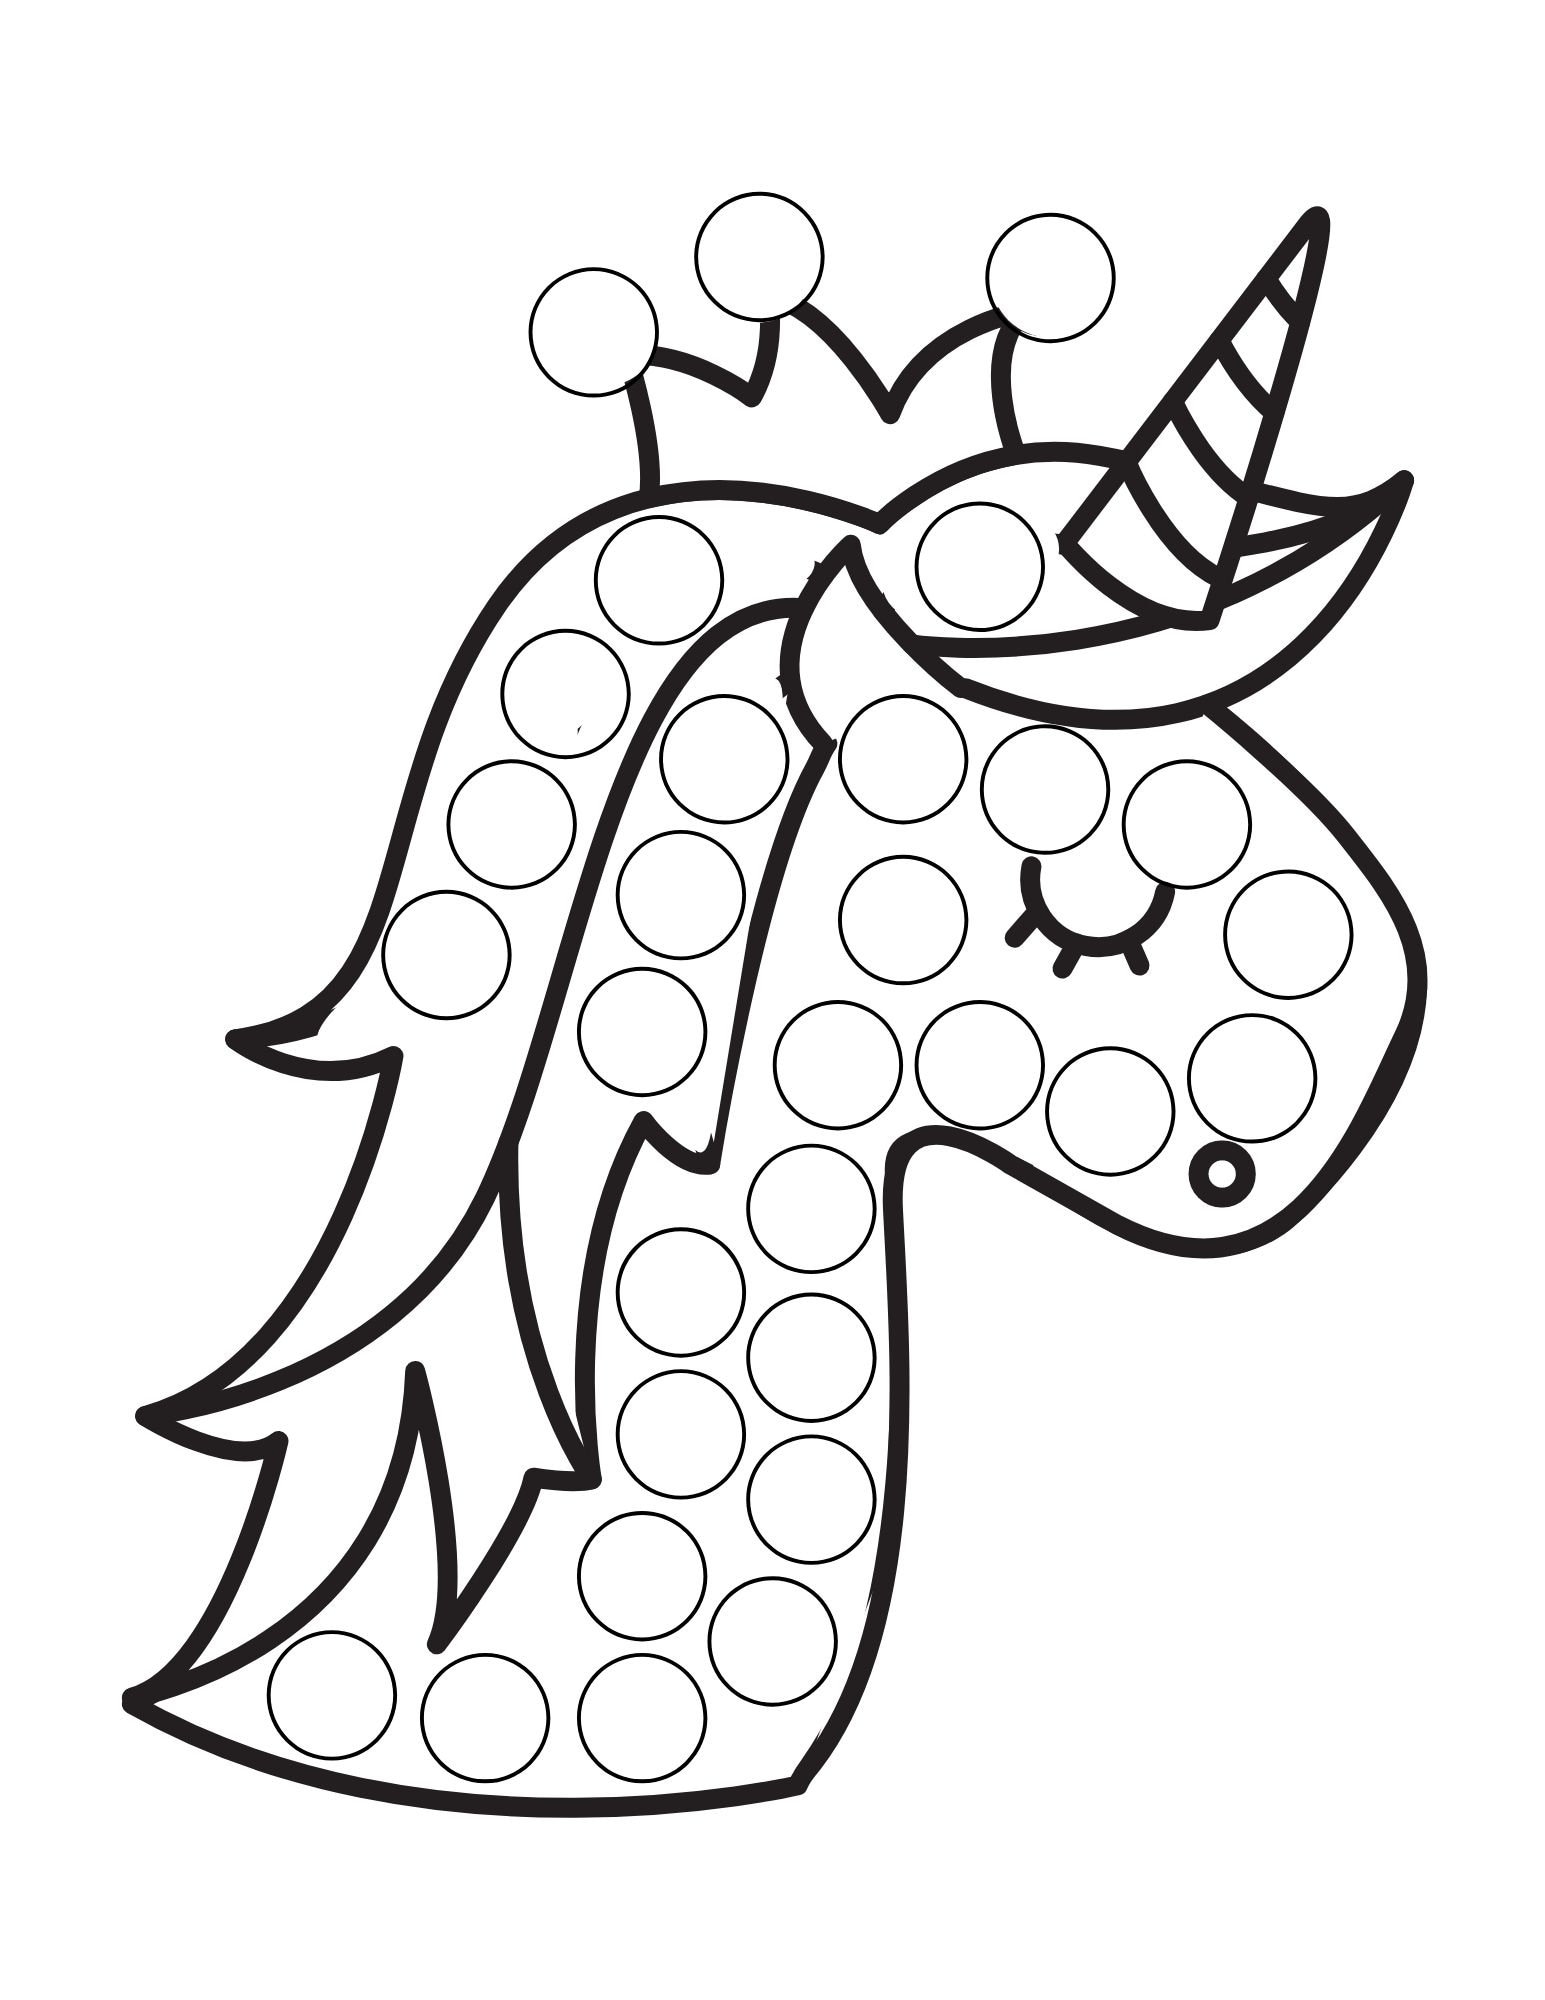 Marker Coloring Page for Kids Graphic by MyBeautifulFiles · Creative Fabrica